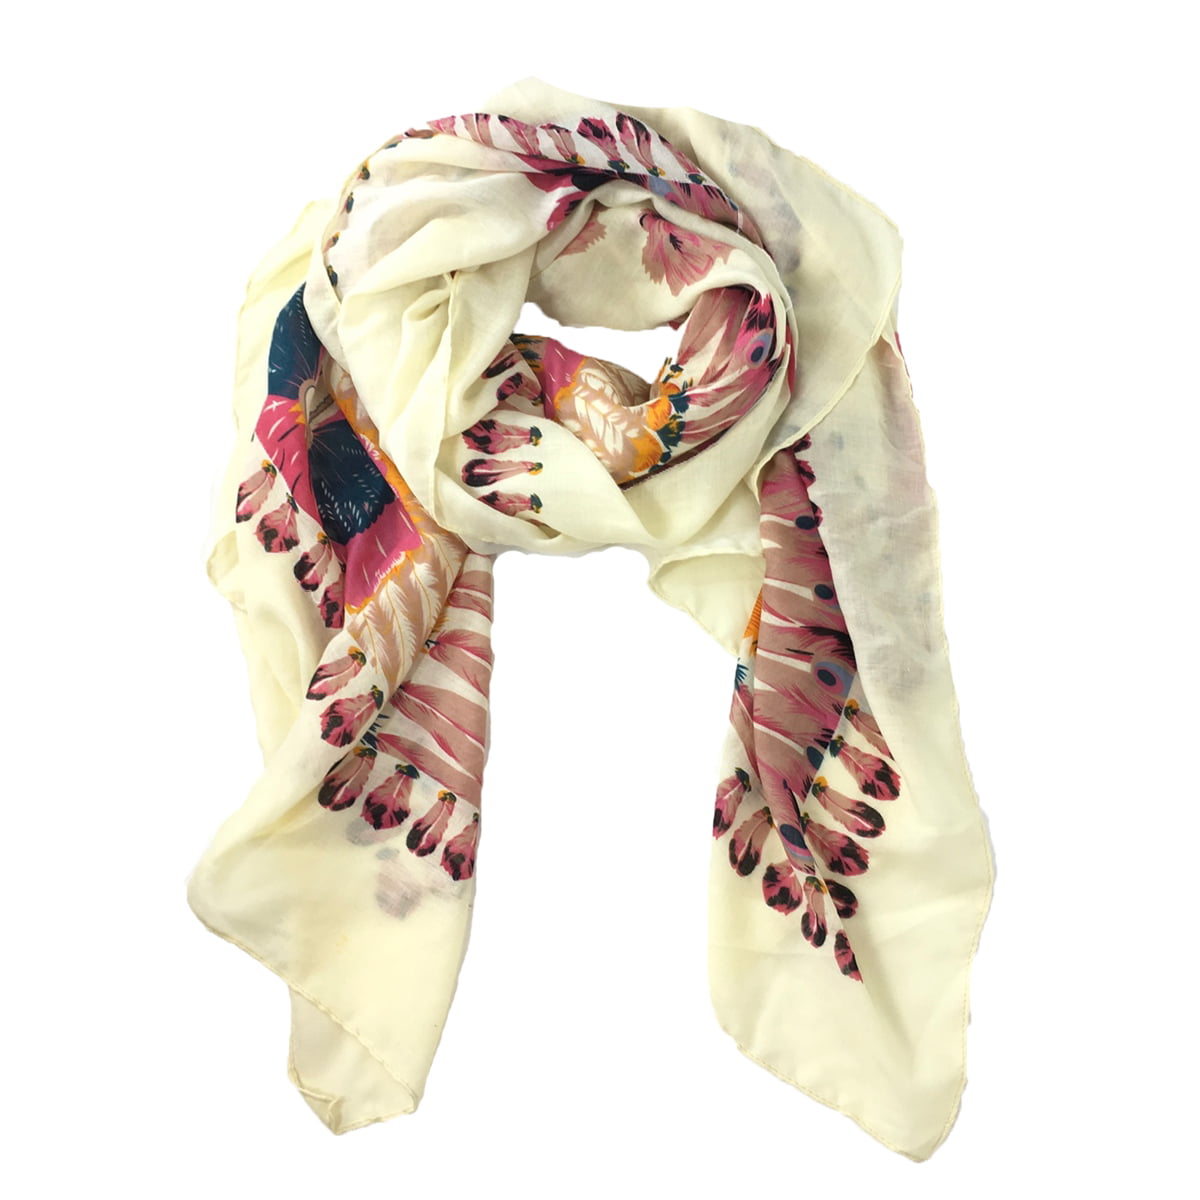 Purchadise NCAA Silky Infinity Scarf with Spatter Design 